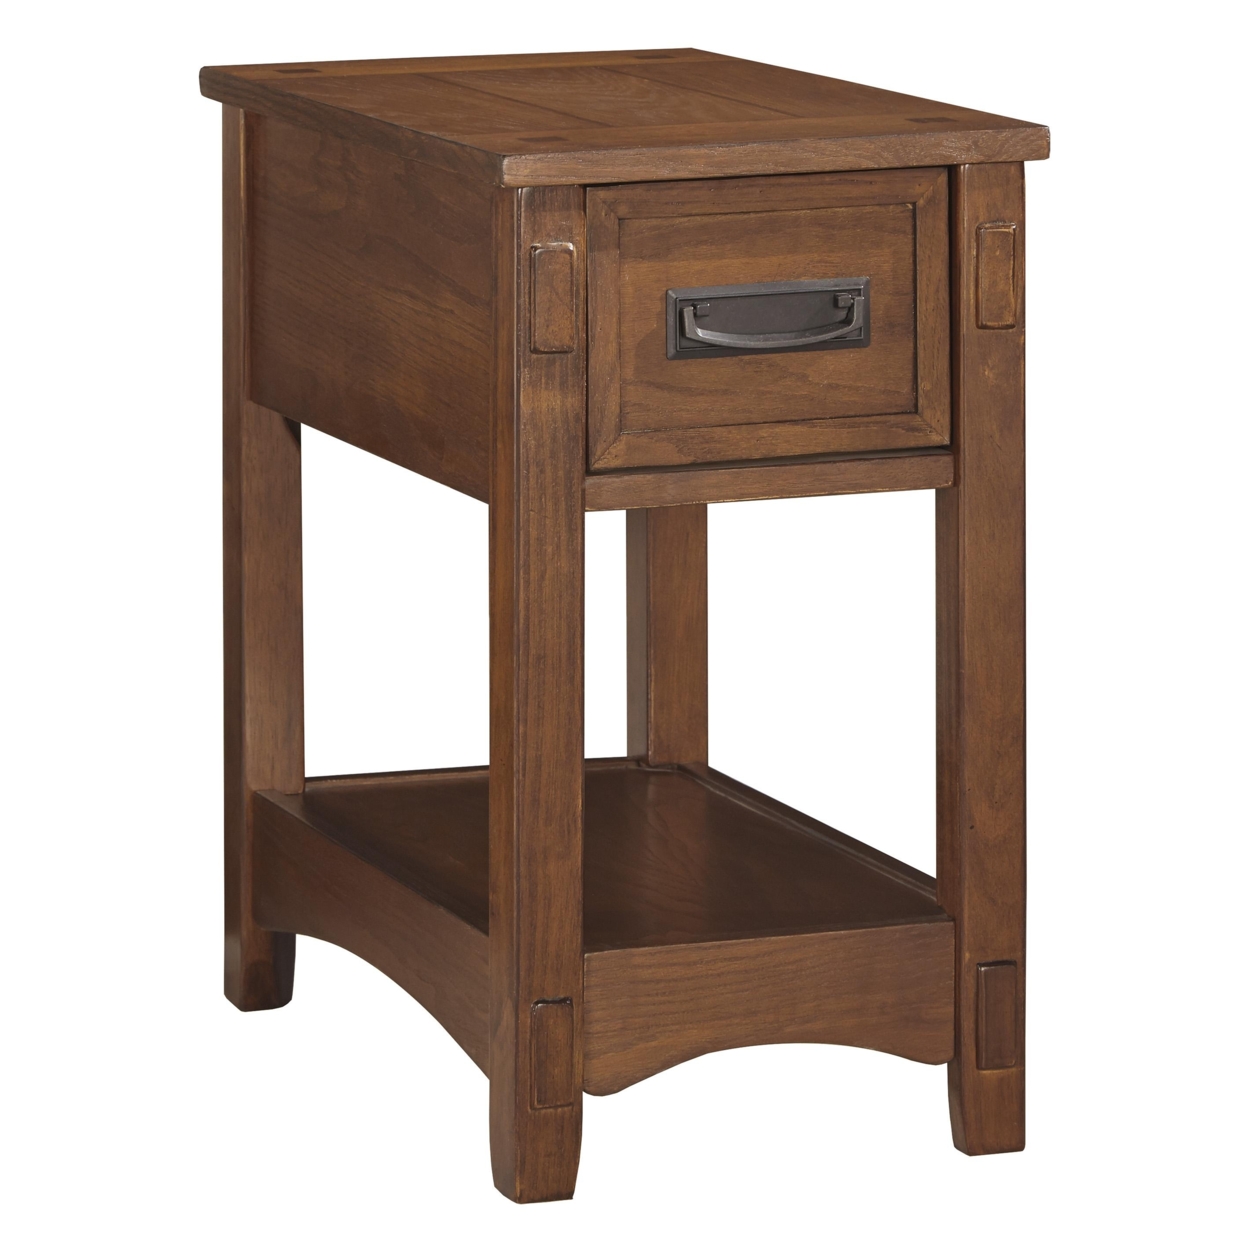 1 Drawer Chair Side End Table With Open Bottom Shelf, Brown- Saltoro Sherpi